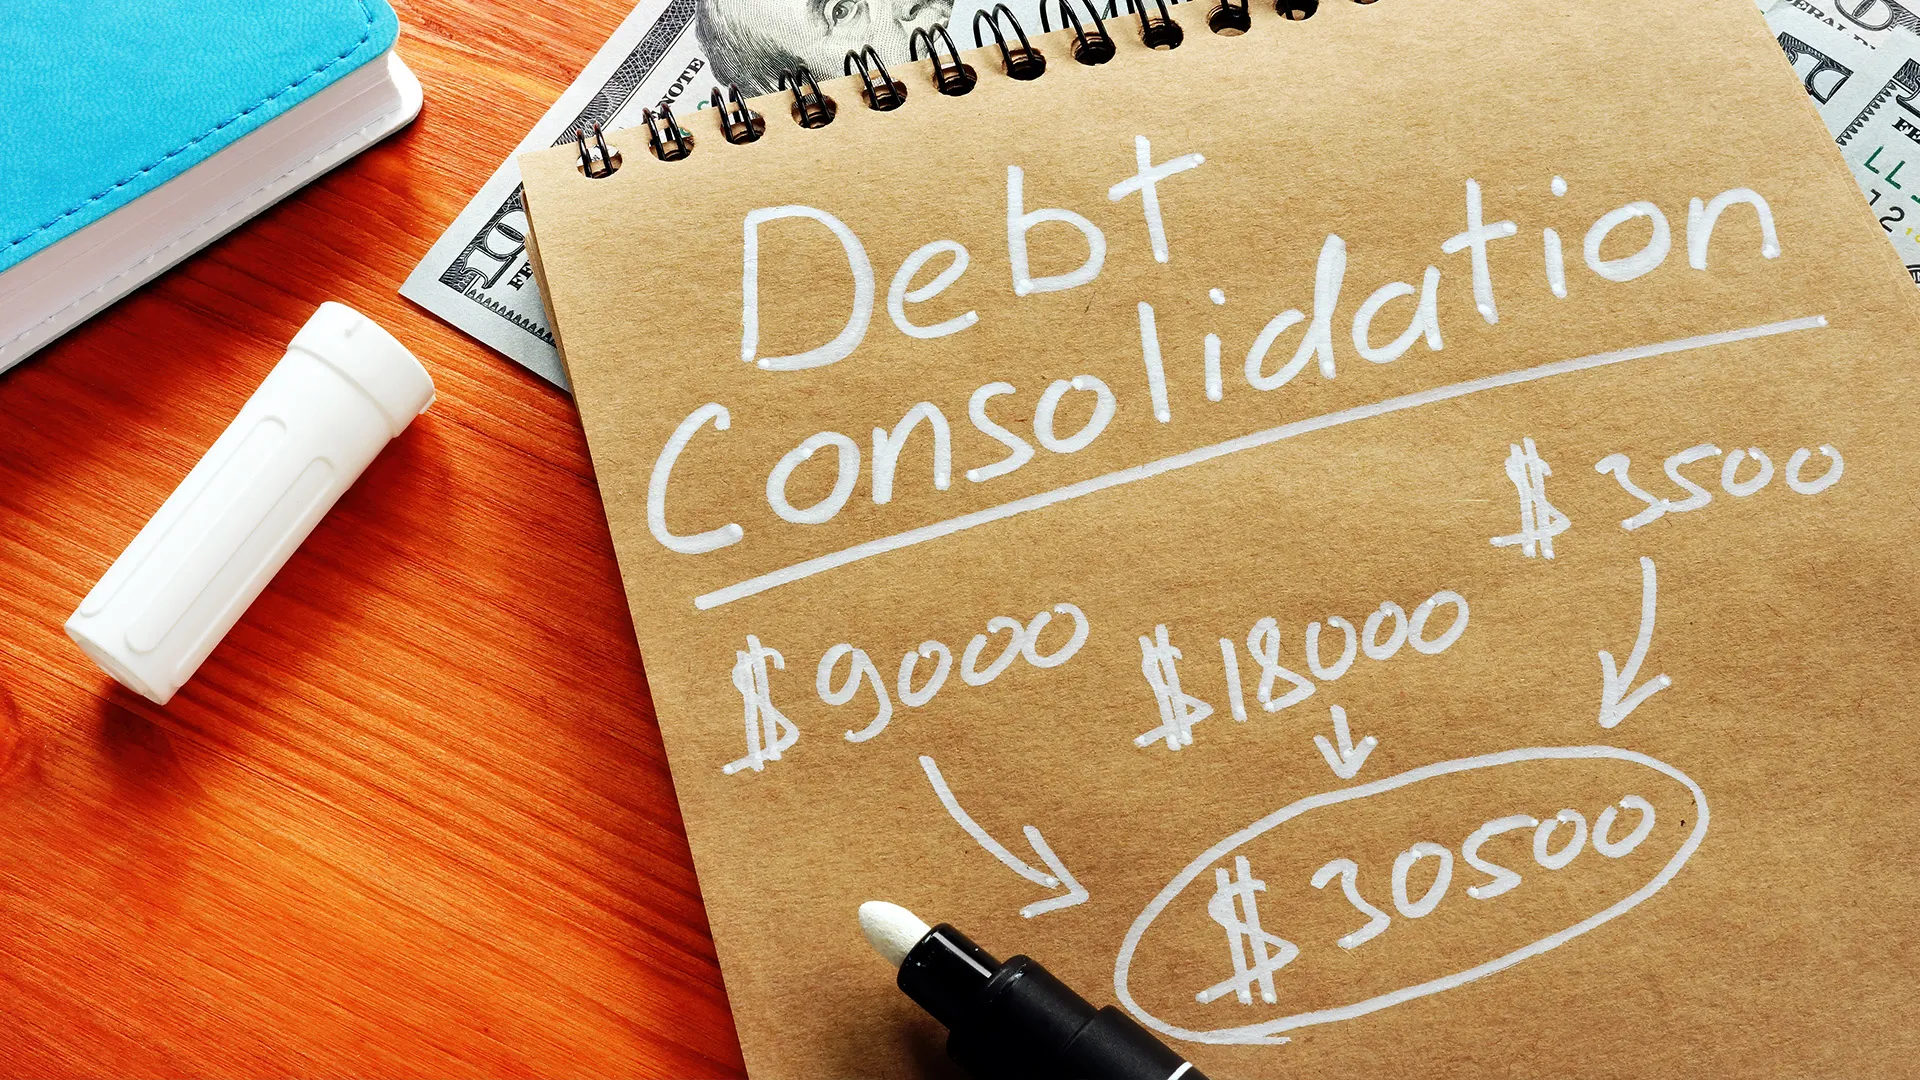 Struggling to Keep Up with Repaying Loans? A Debt Consolidation Loan Might Be the Solution For You